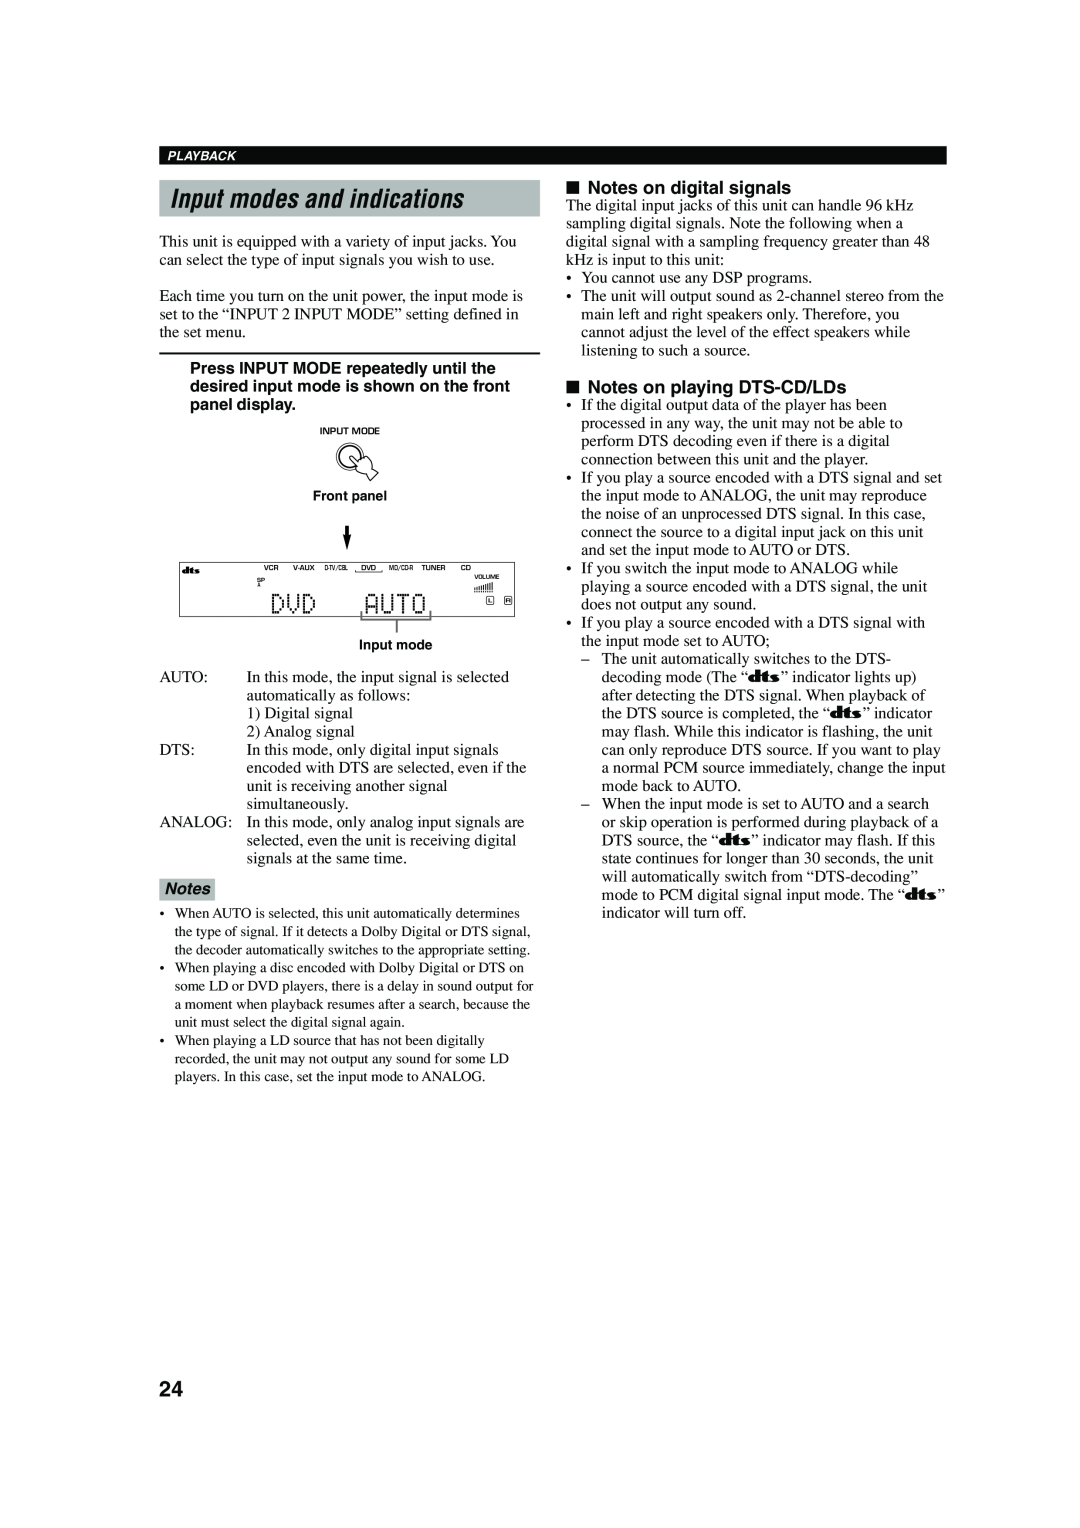 Yamaha RX-V440RDS owner manual Input modes and indications, Auto, Notes on digital signals, Notes on playing DTS-CD/LDs 